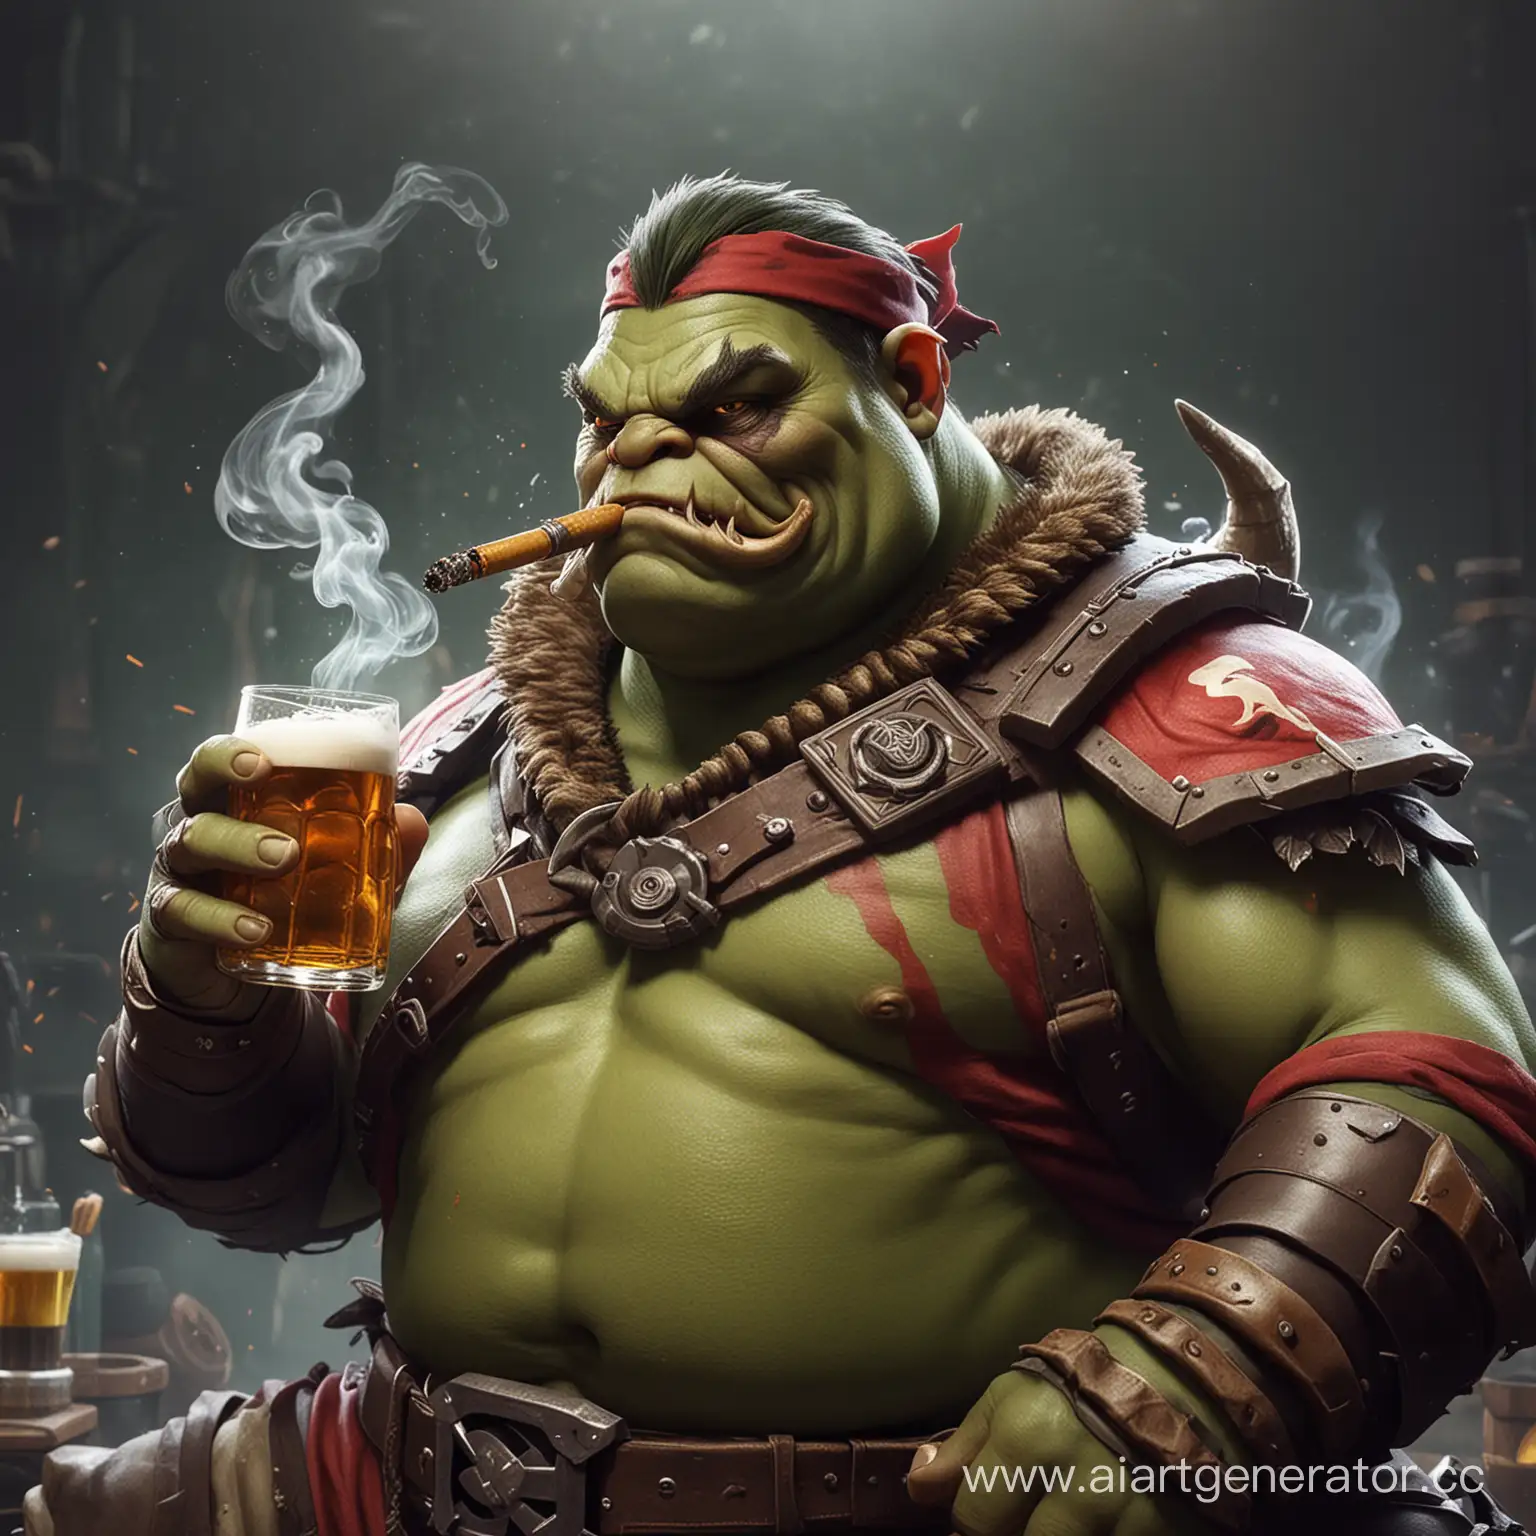 Pudge-from-Dota-2-Smoking-Cigarette-and-Drinking-Beer-in-ViperStyle-Attire